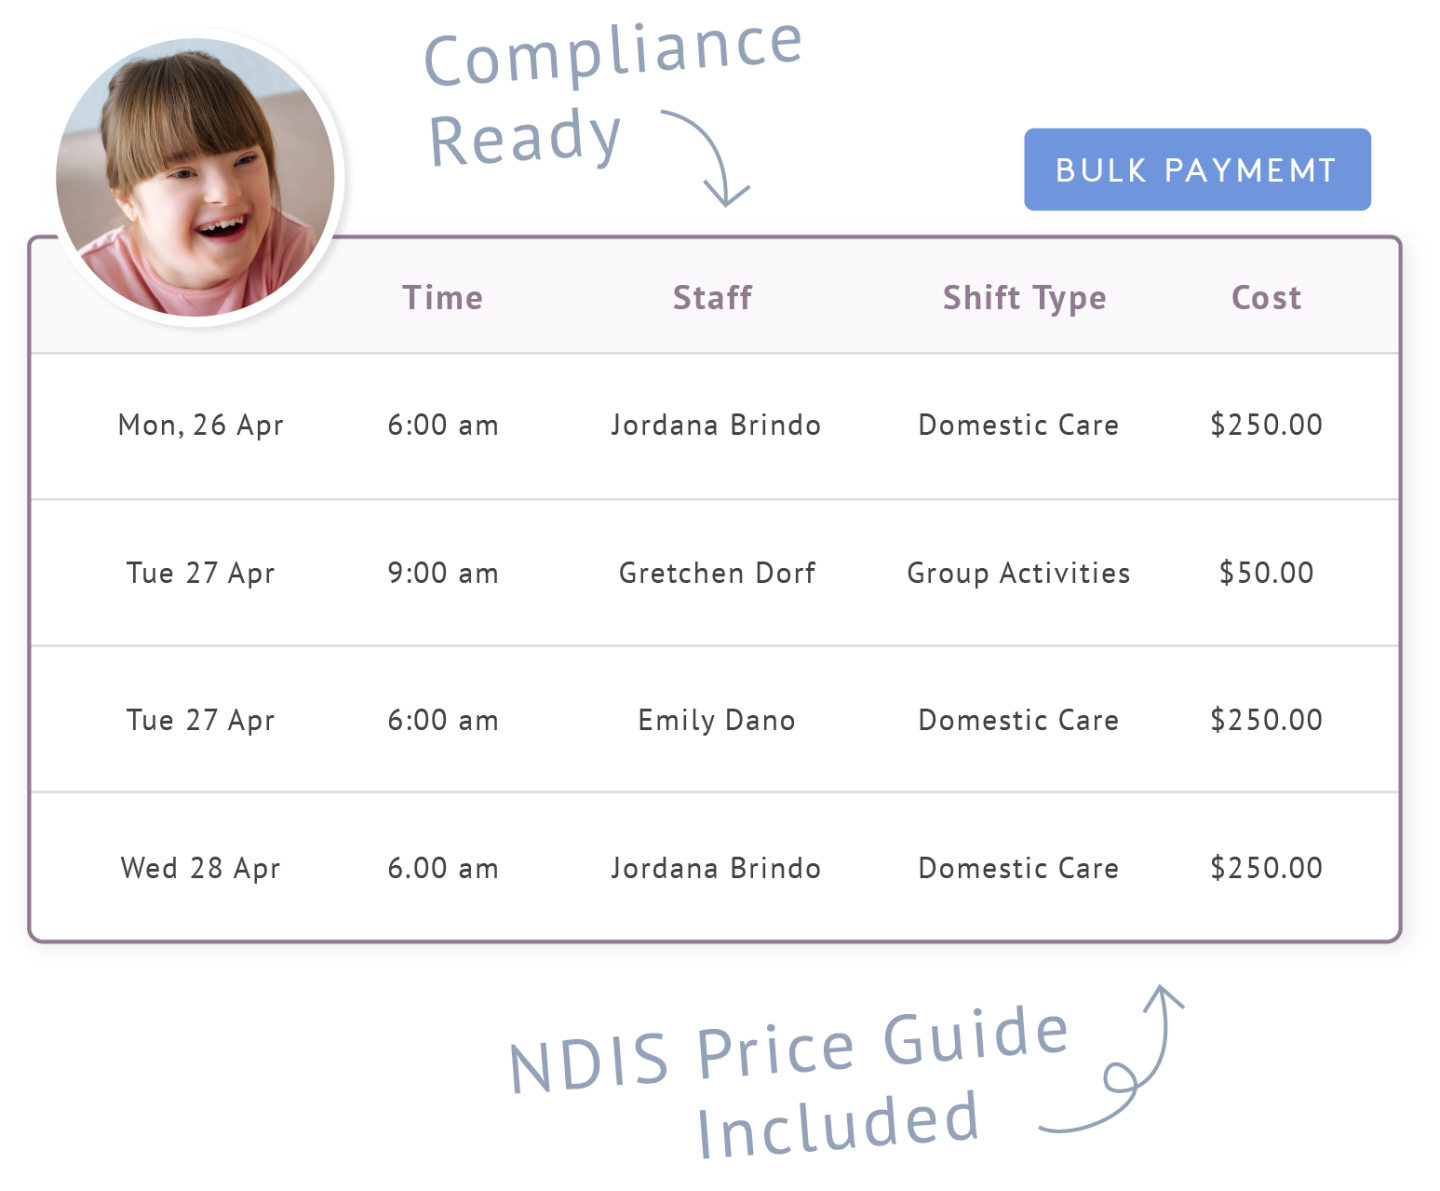 Young girl with disability and her payment request table on ShiftCare showing time and dates, staff, time, shift type, and NDIS-integrated costs